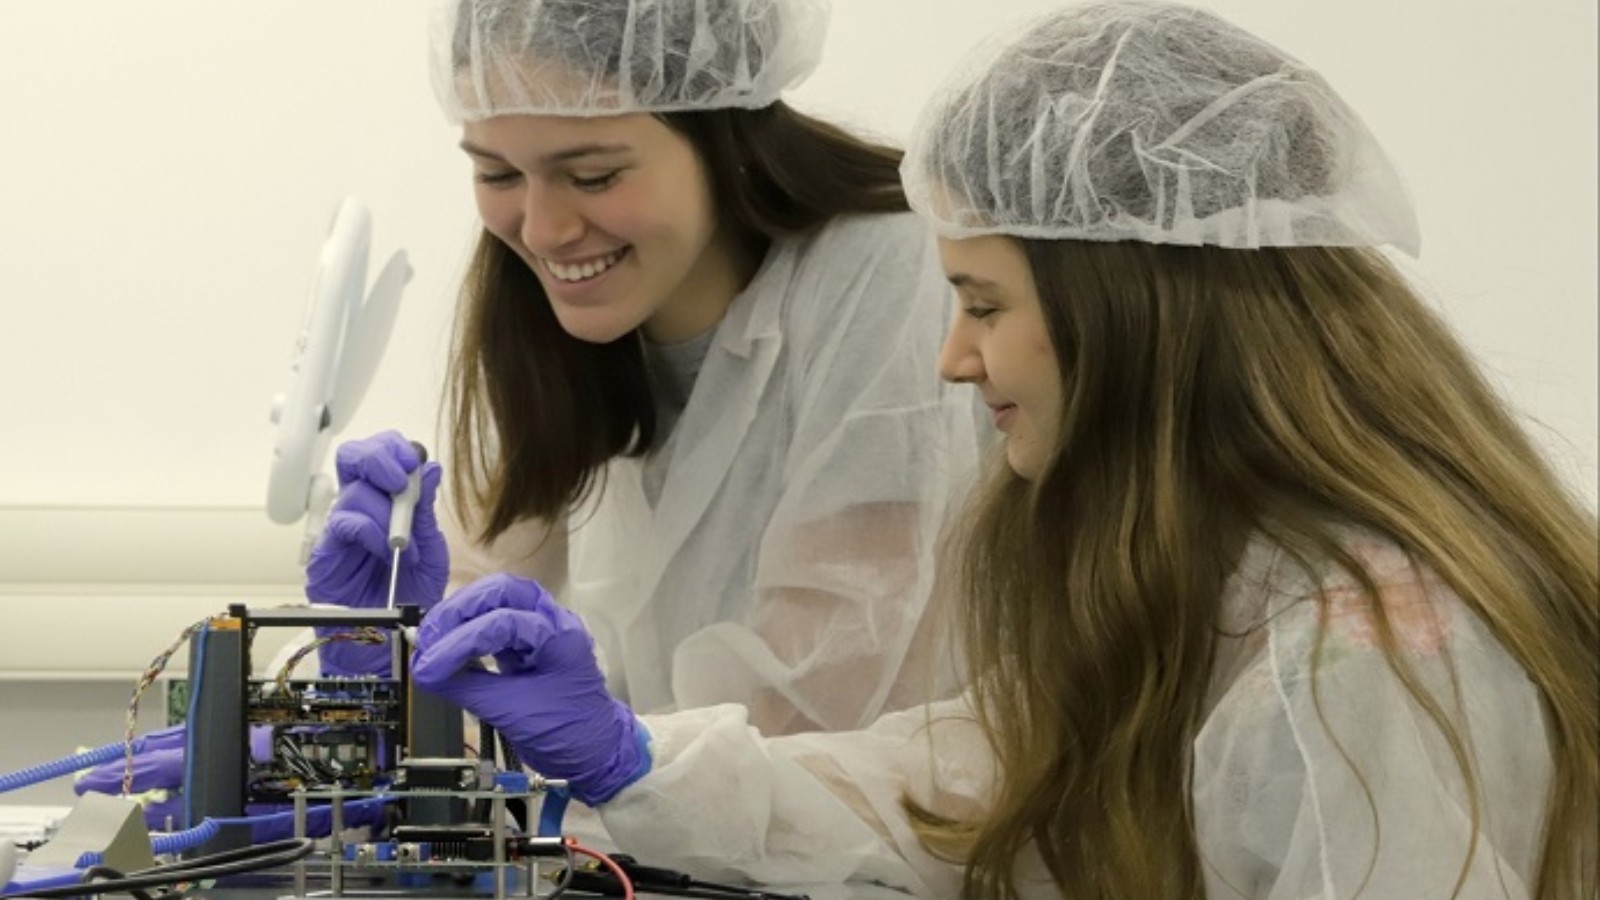 Students from Givat Shmuel assembling a satellite as part of the TEVEL program. Photo courtesy of Israel Space Agency